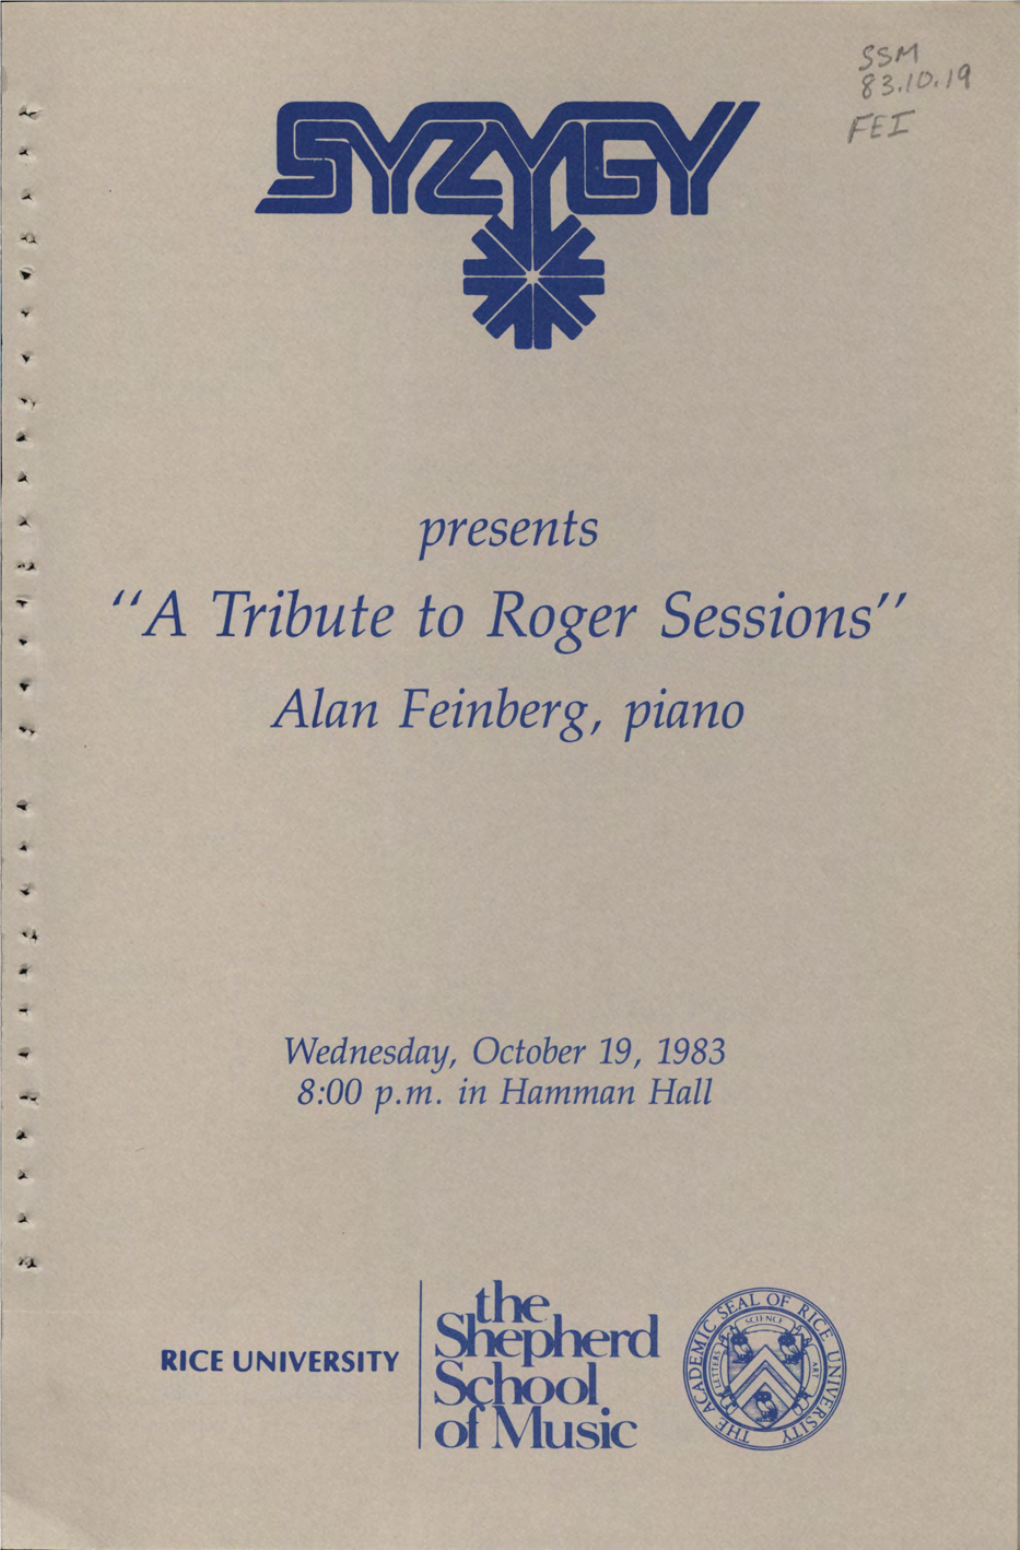 "A Tribute to Roger Sessions" Alan Feinberg, Piano Wednesday